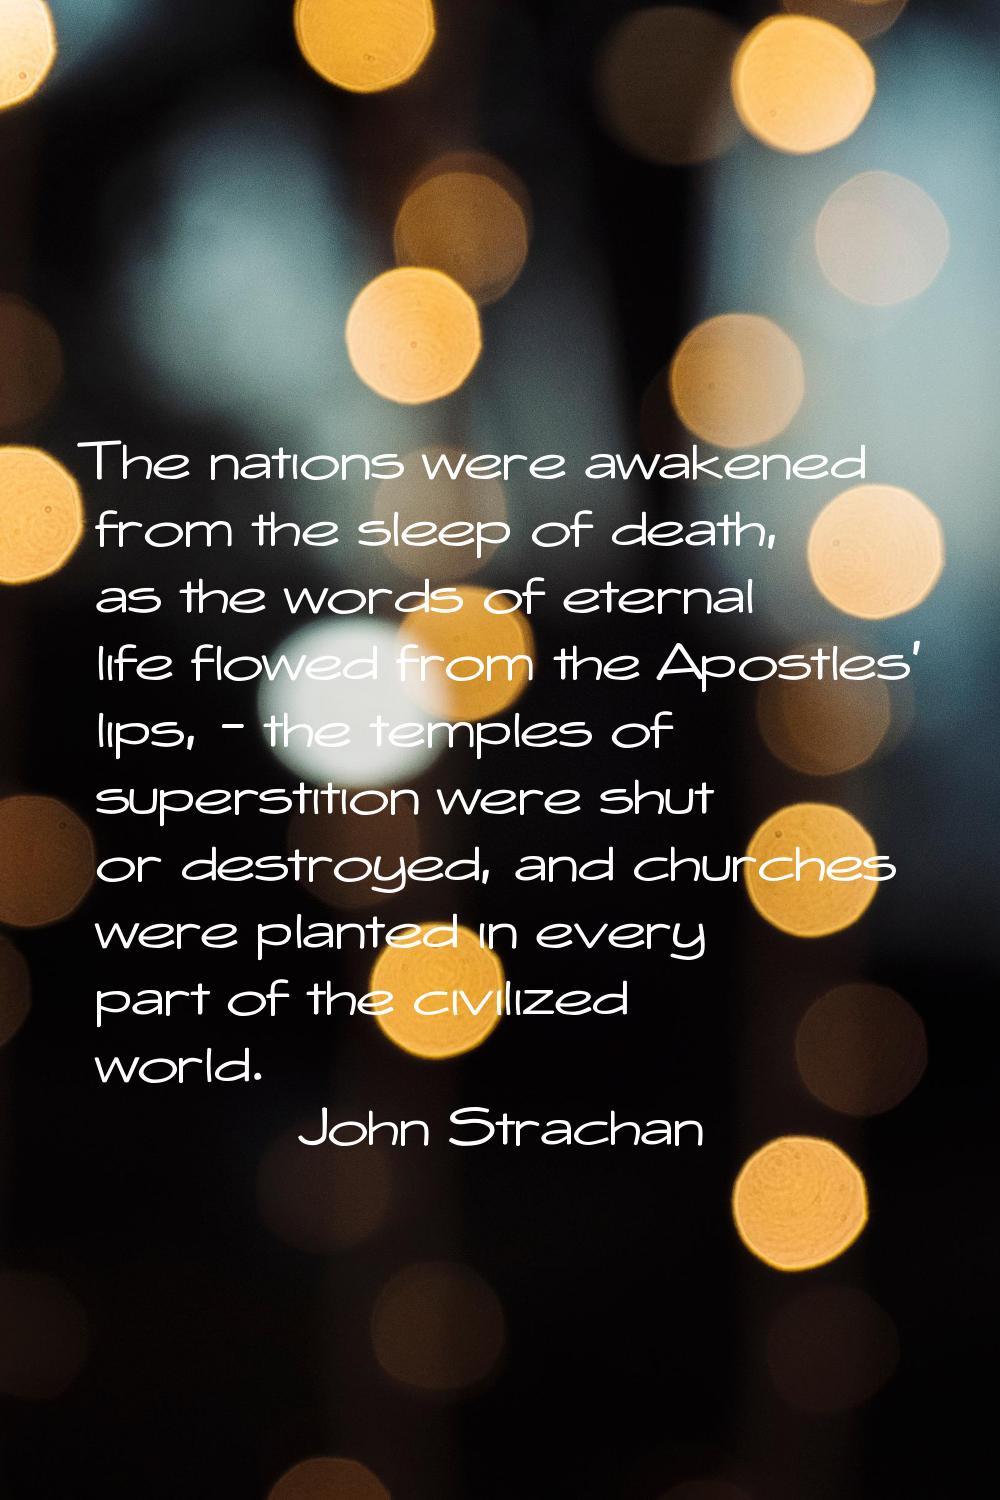 The nations were awakened from the sleep of death, as the words of eternal life flowed from the Apo